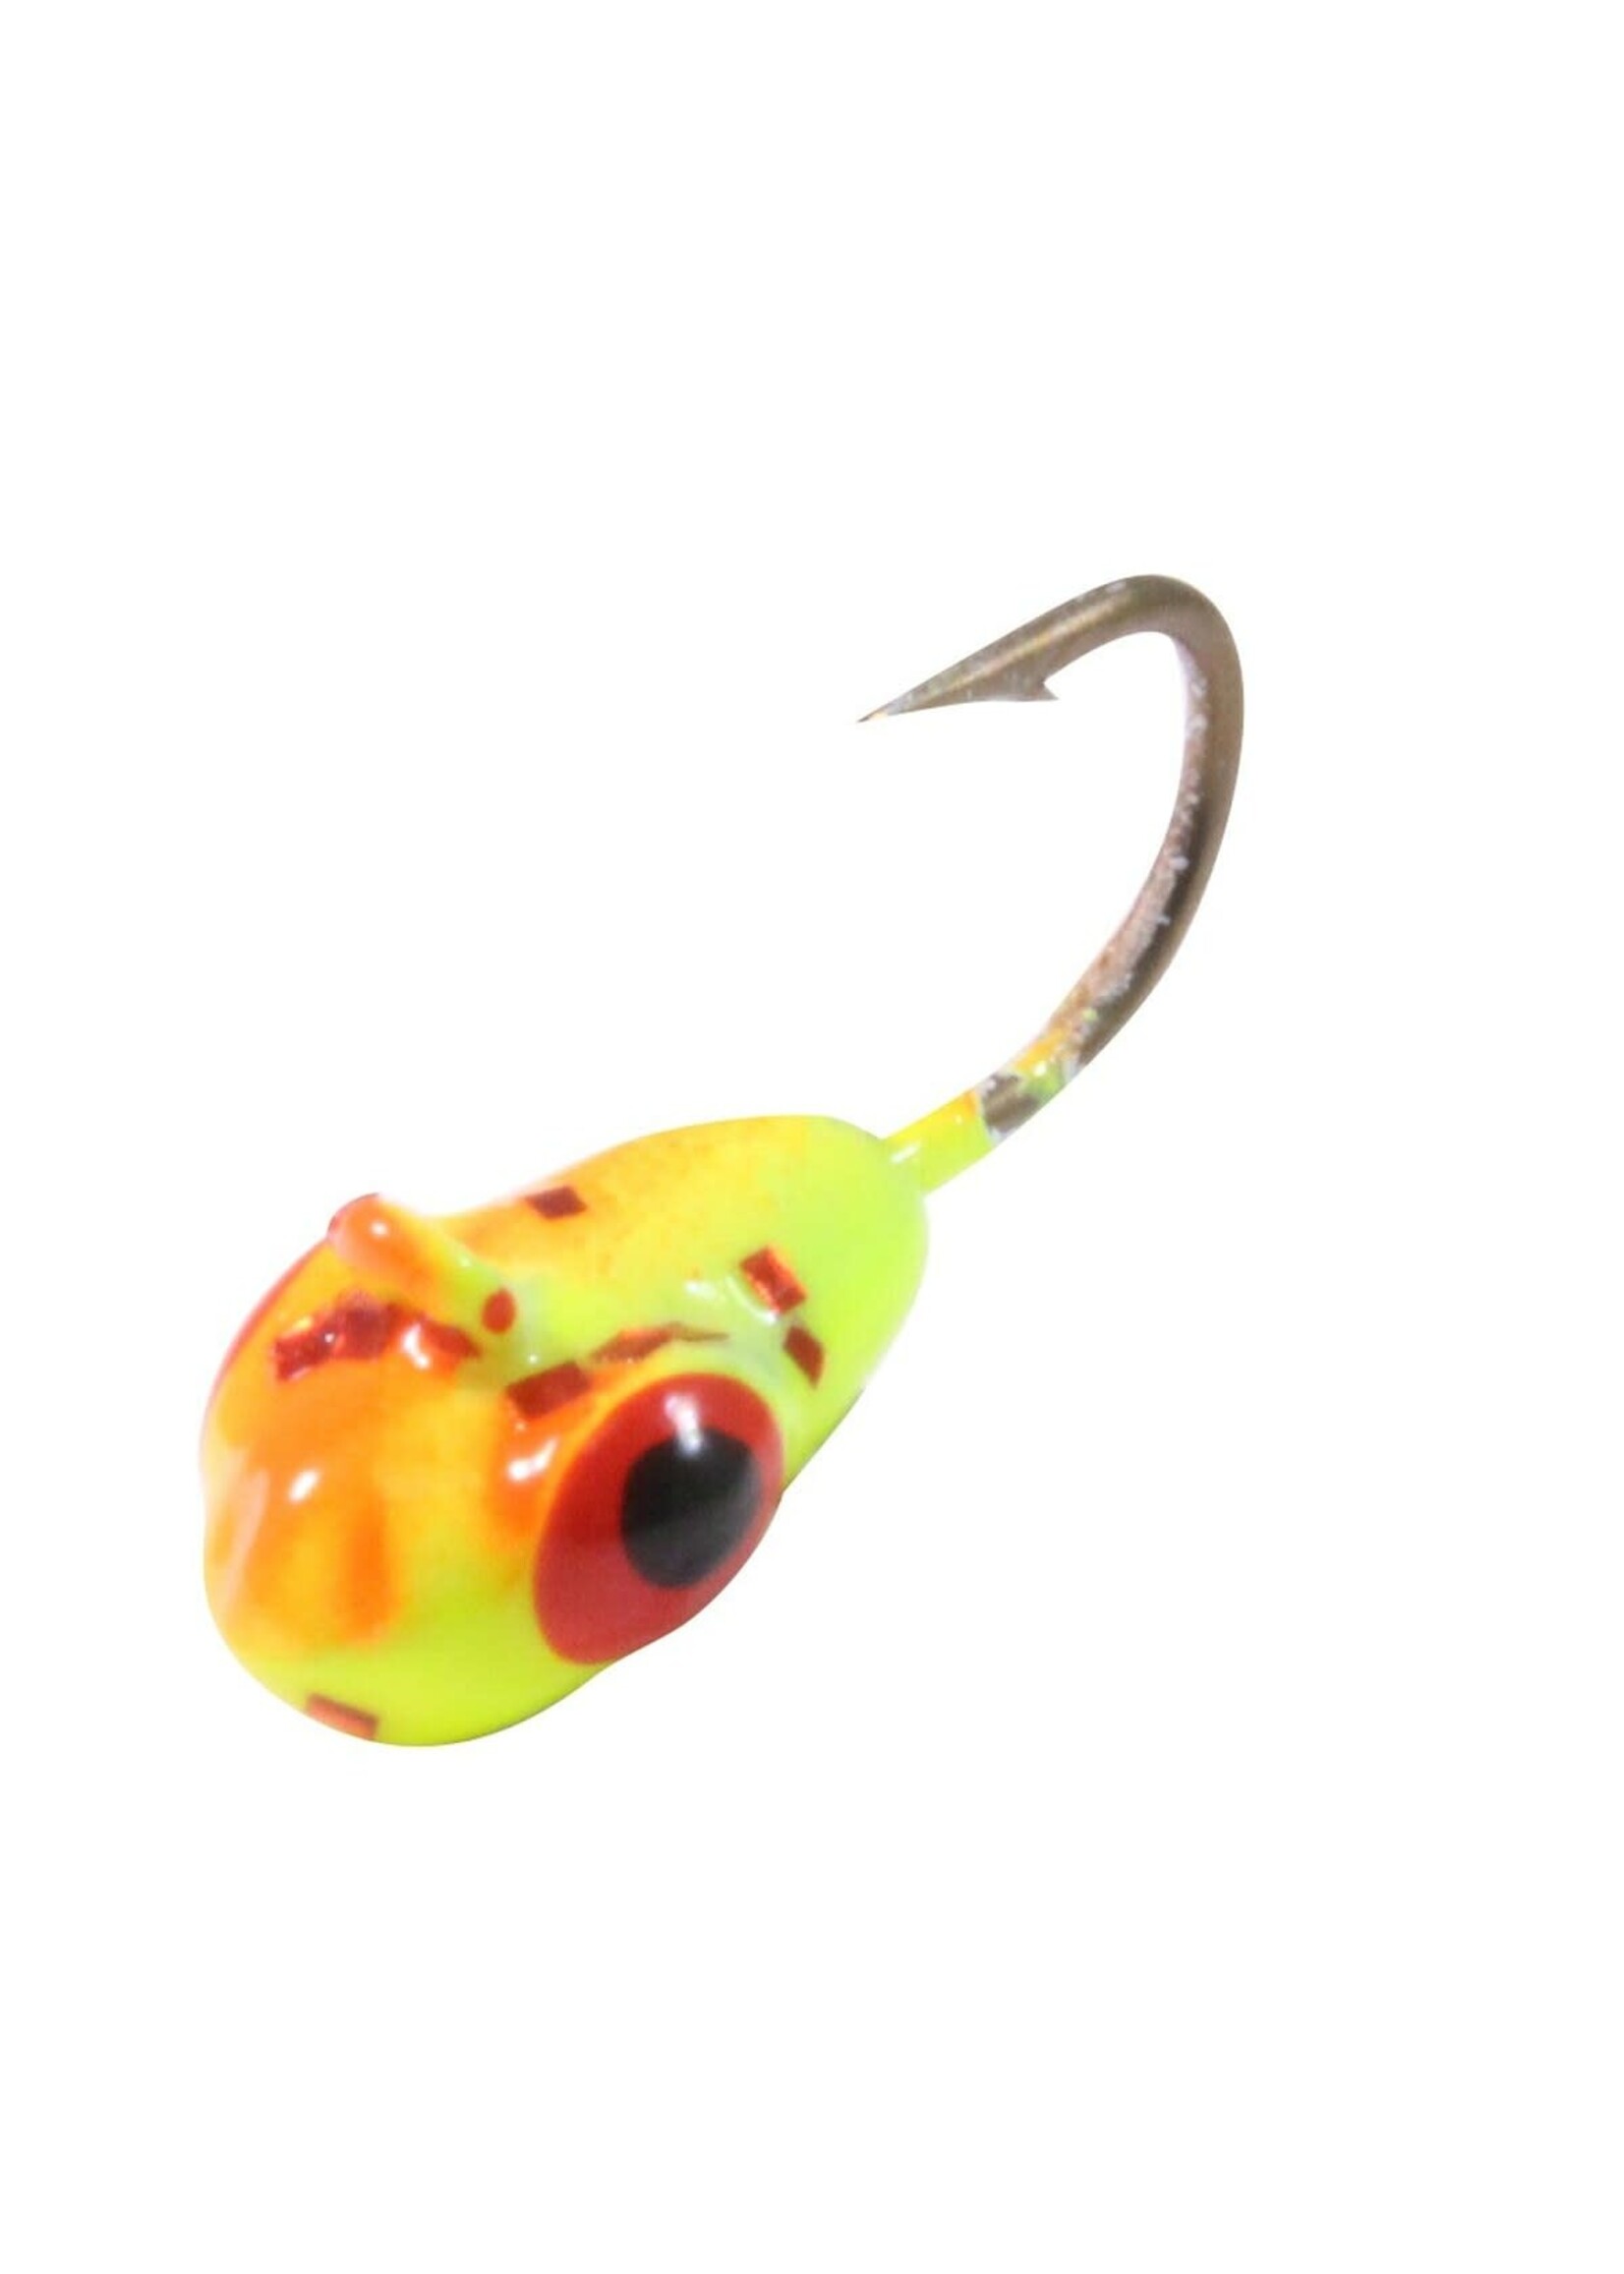 Northland Fishing Tackle Northland Tackle Gill Getter Jig